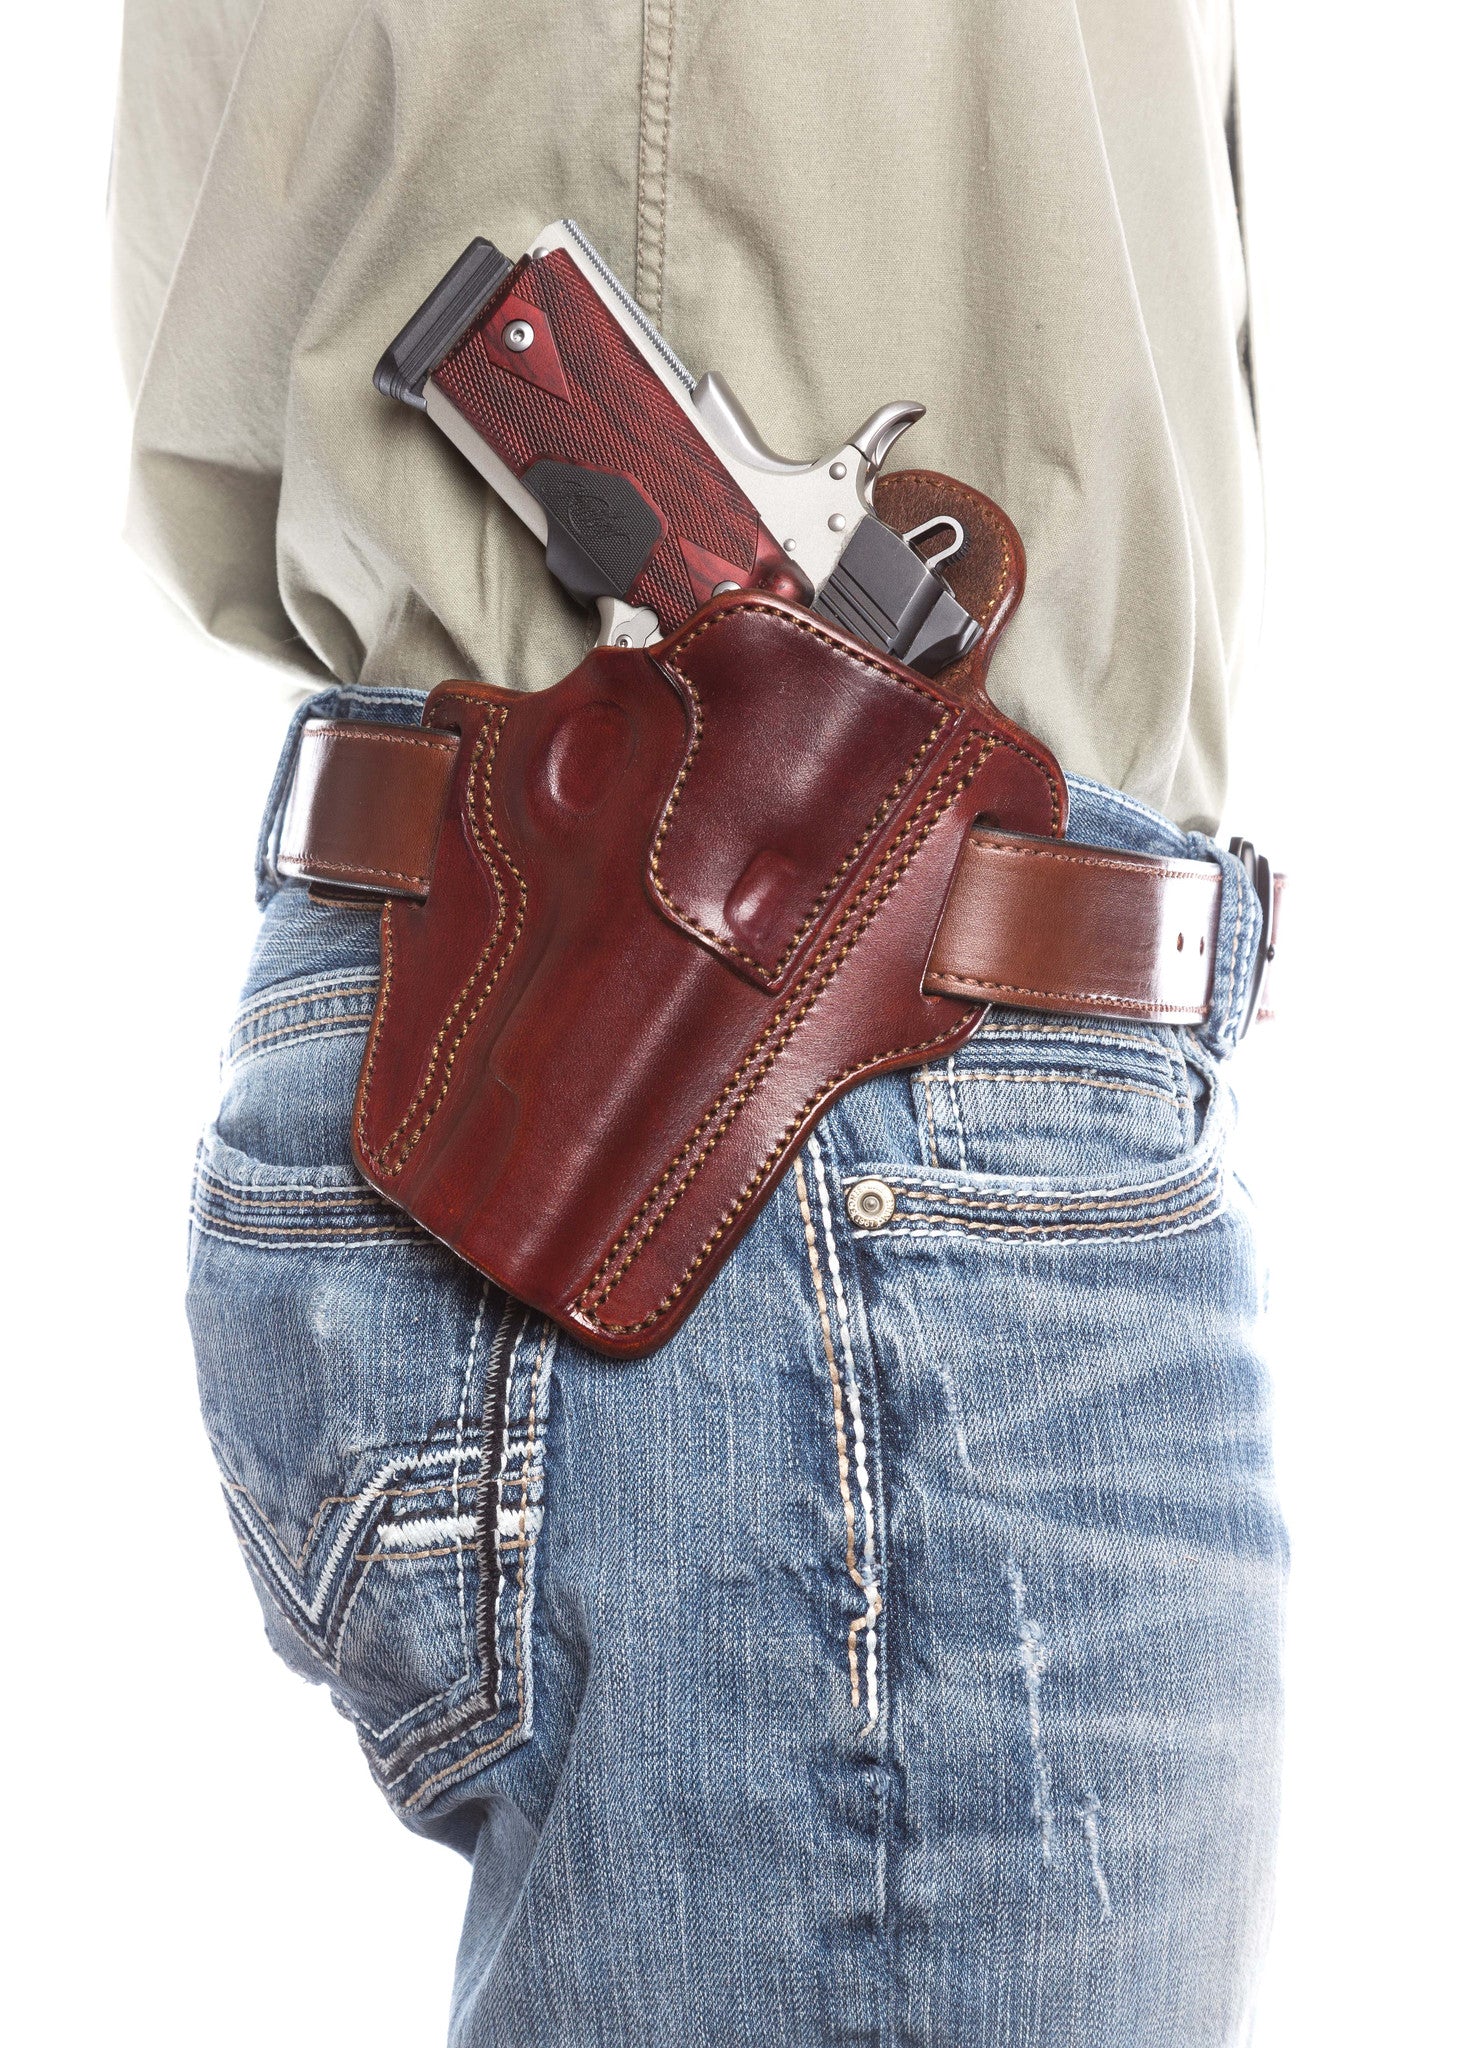 Leather Concealed Carry Pancake Holster, Diamond D Custom Leather